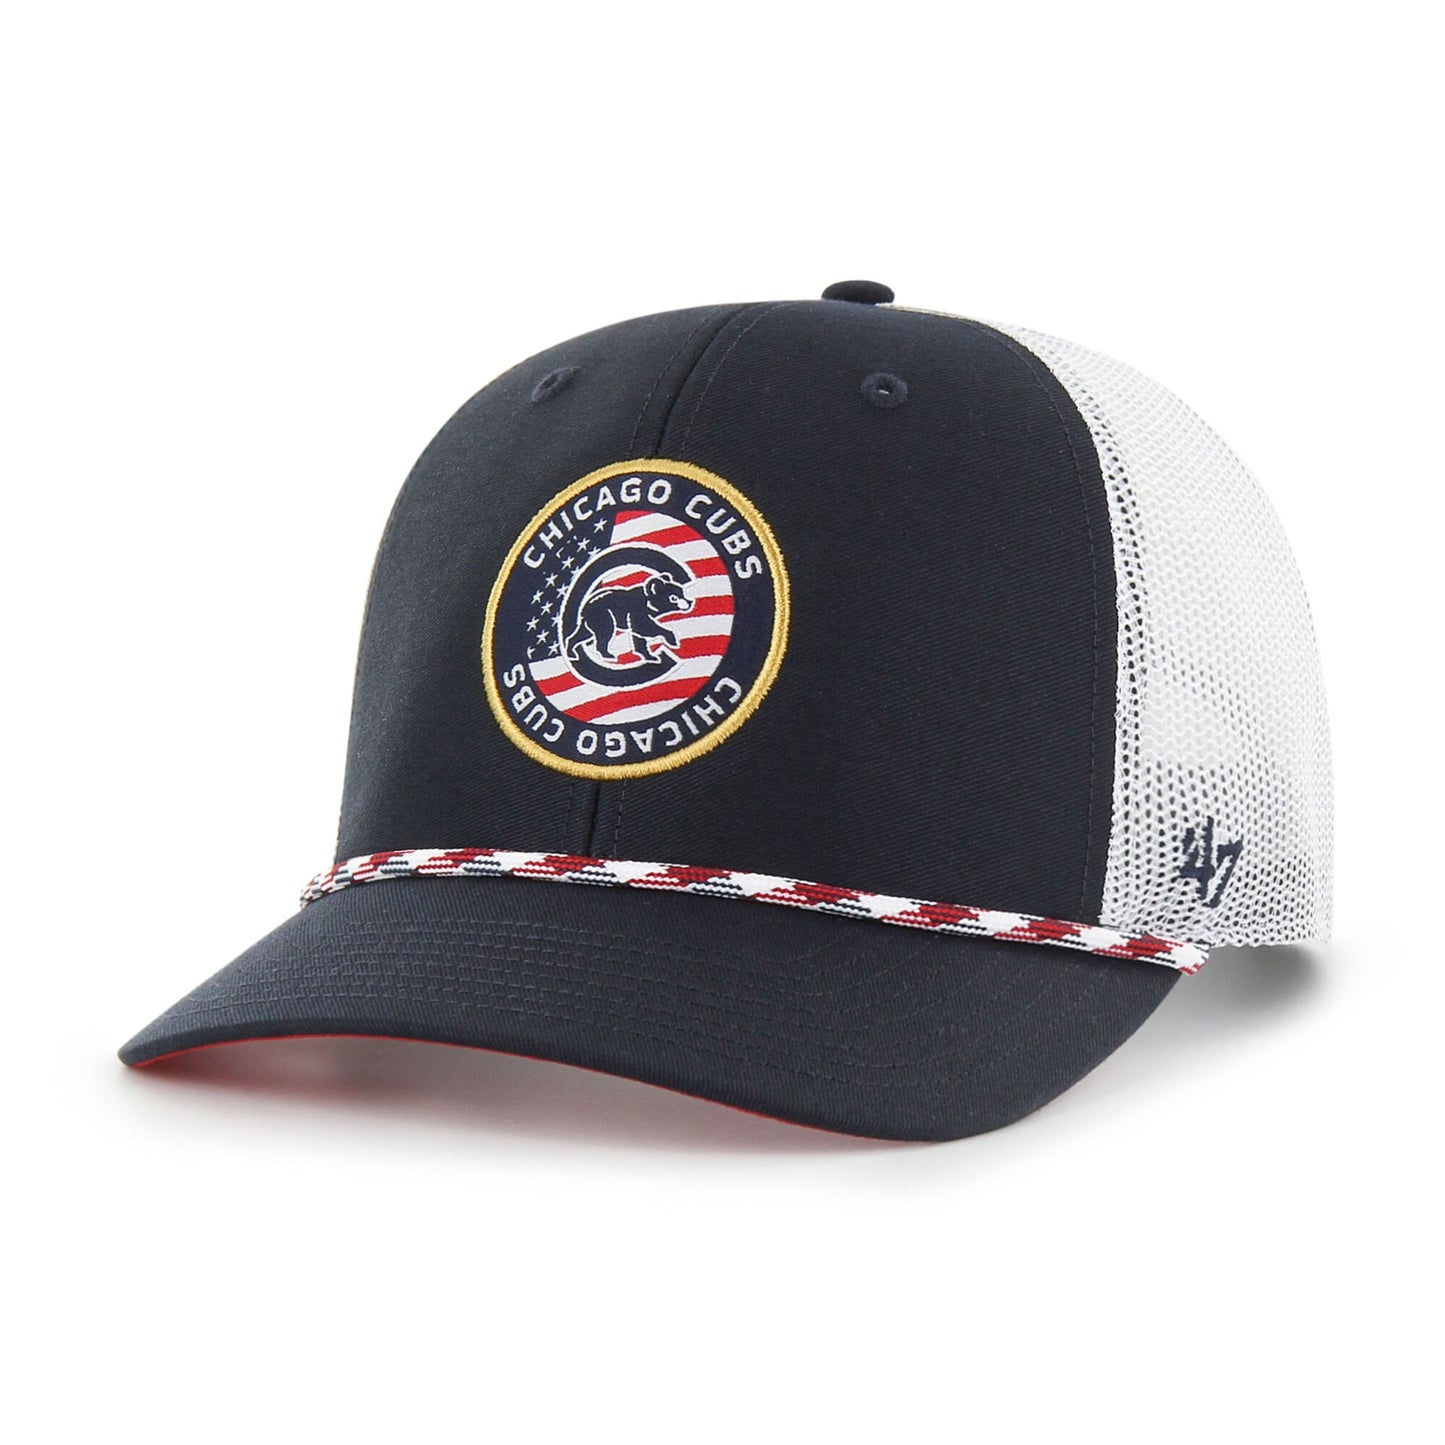 Chicago Cubs '47 Union Patch Trucker Adjustable Hat - Navy